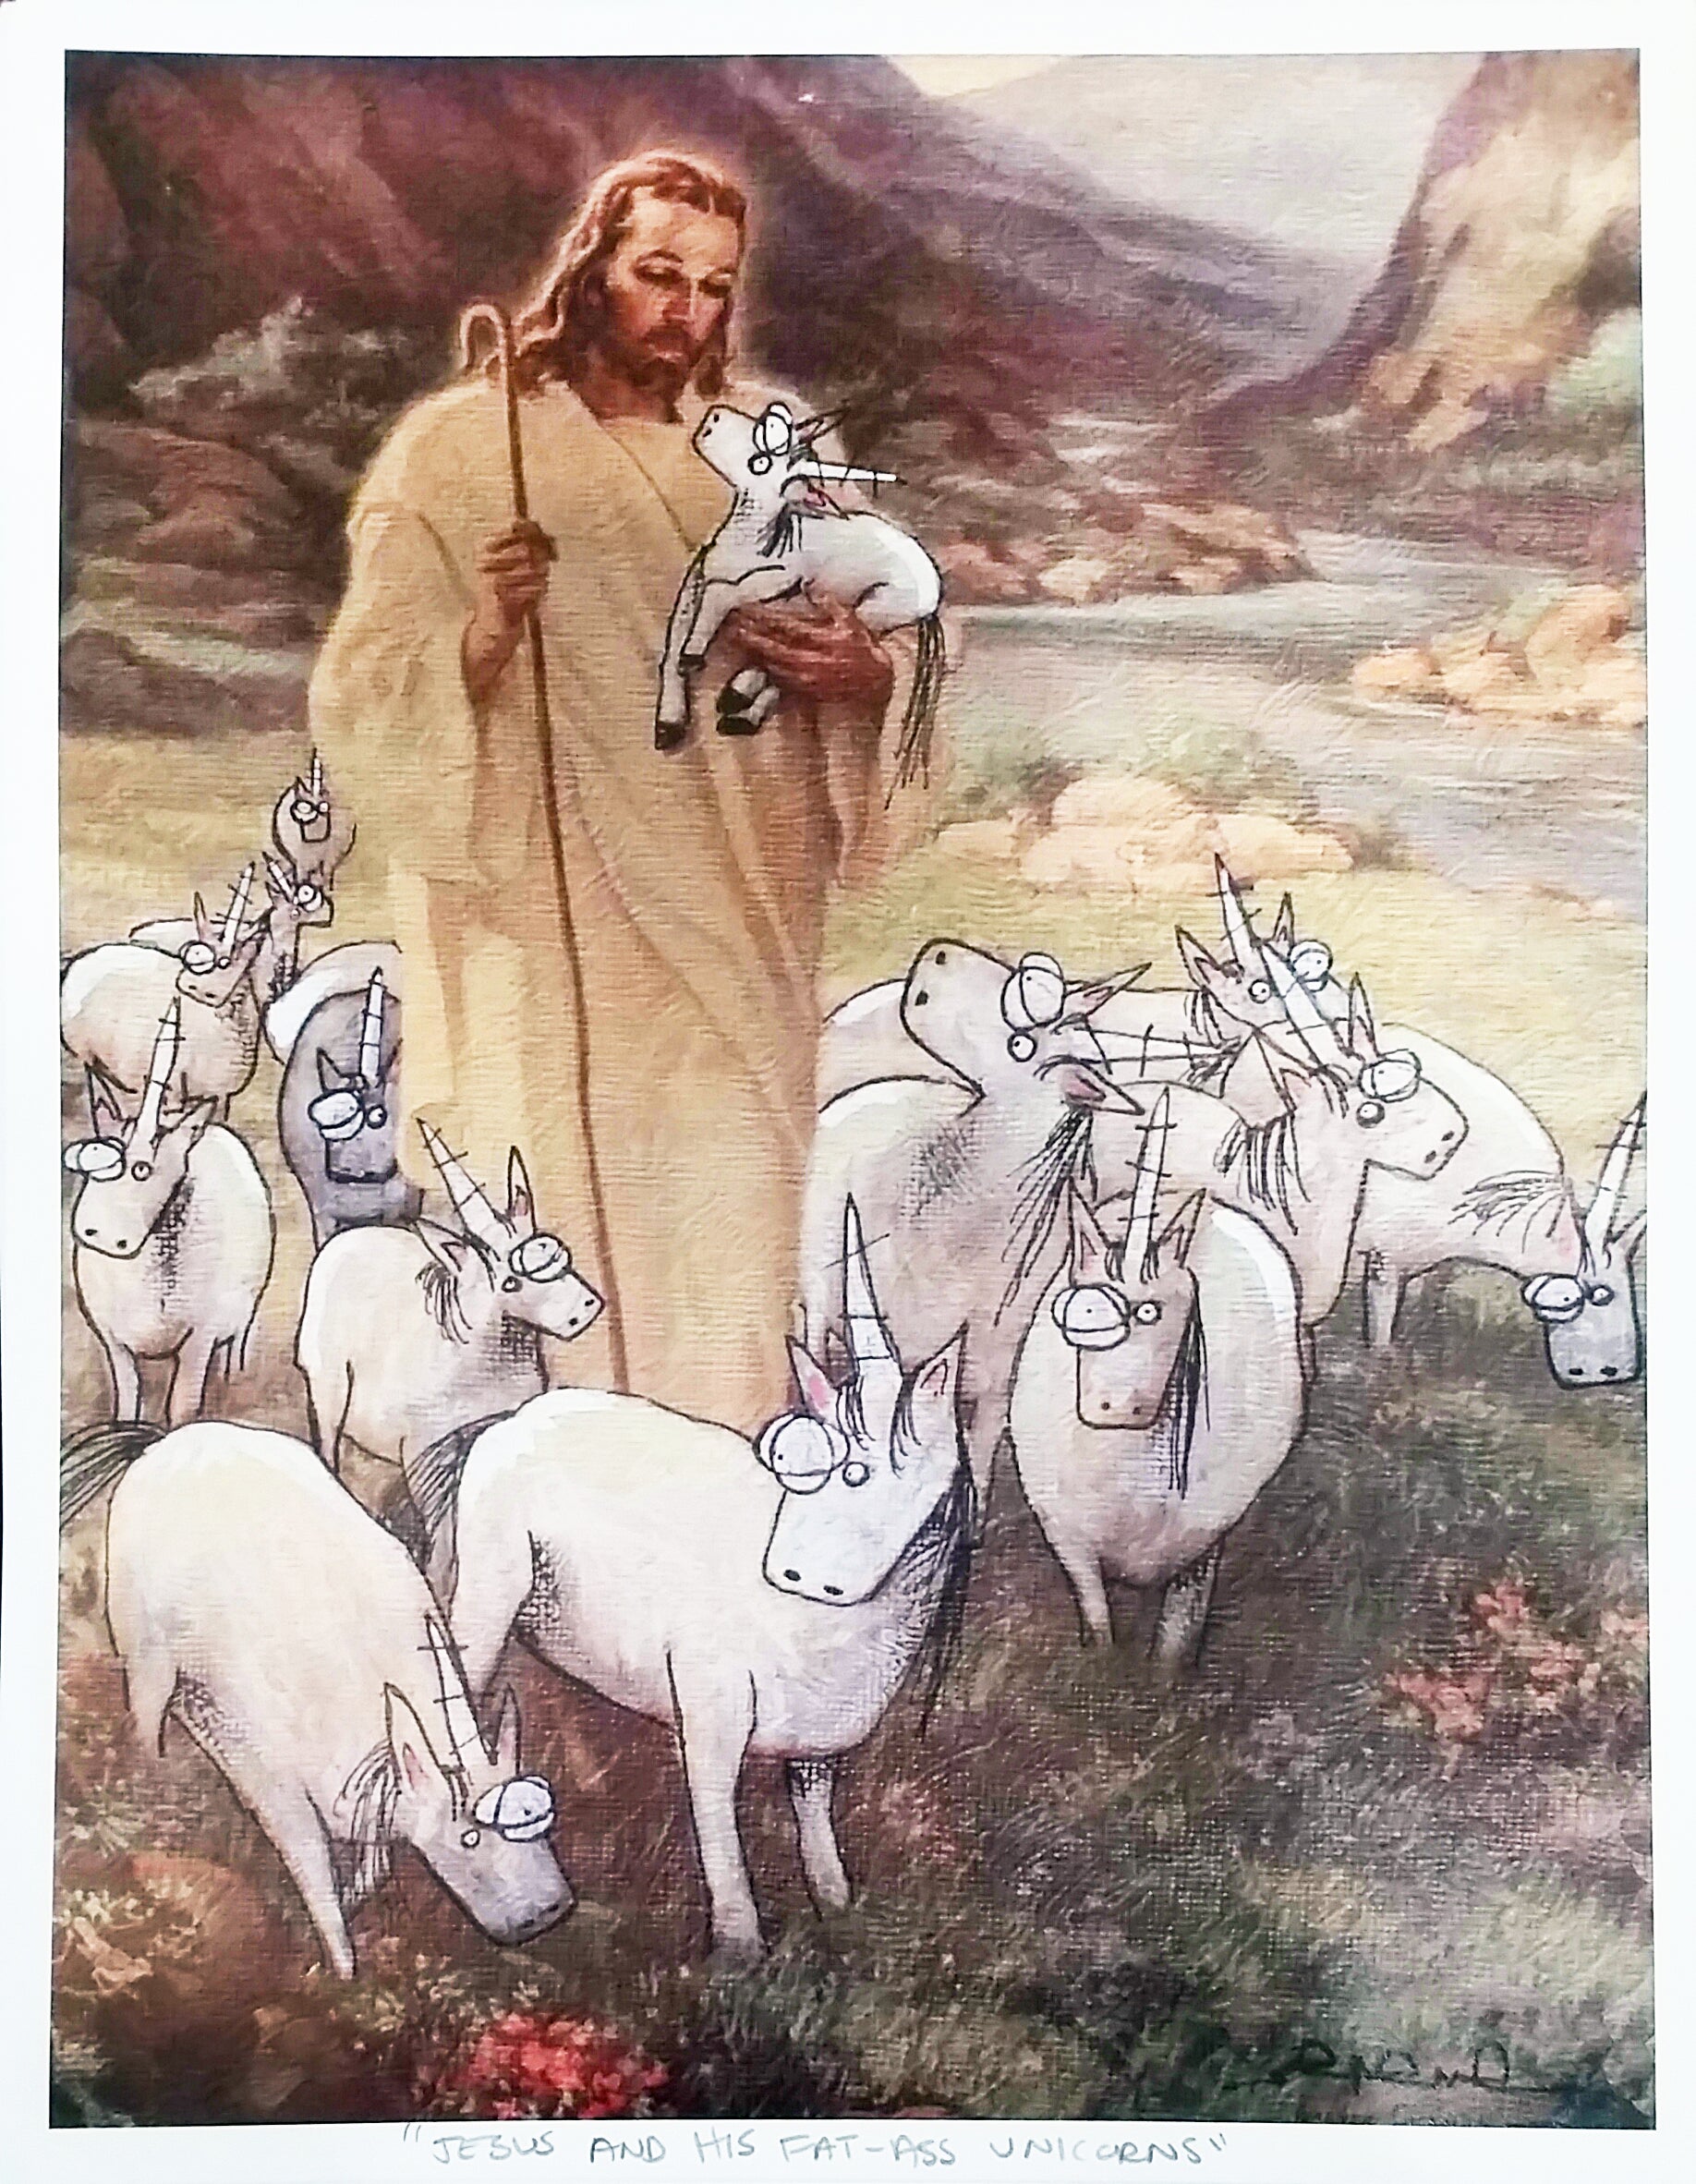 Jesus and His Fat-Ass Unicorns